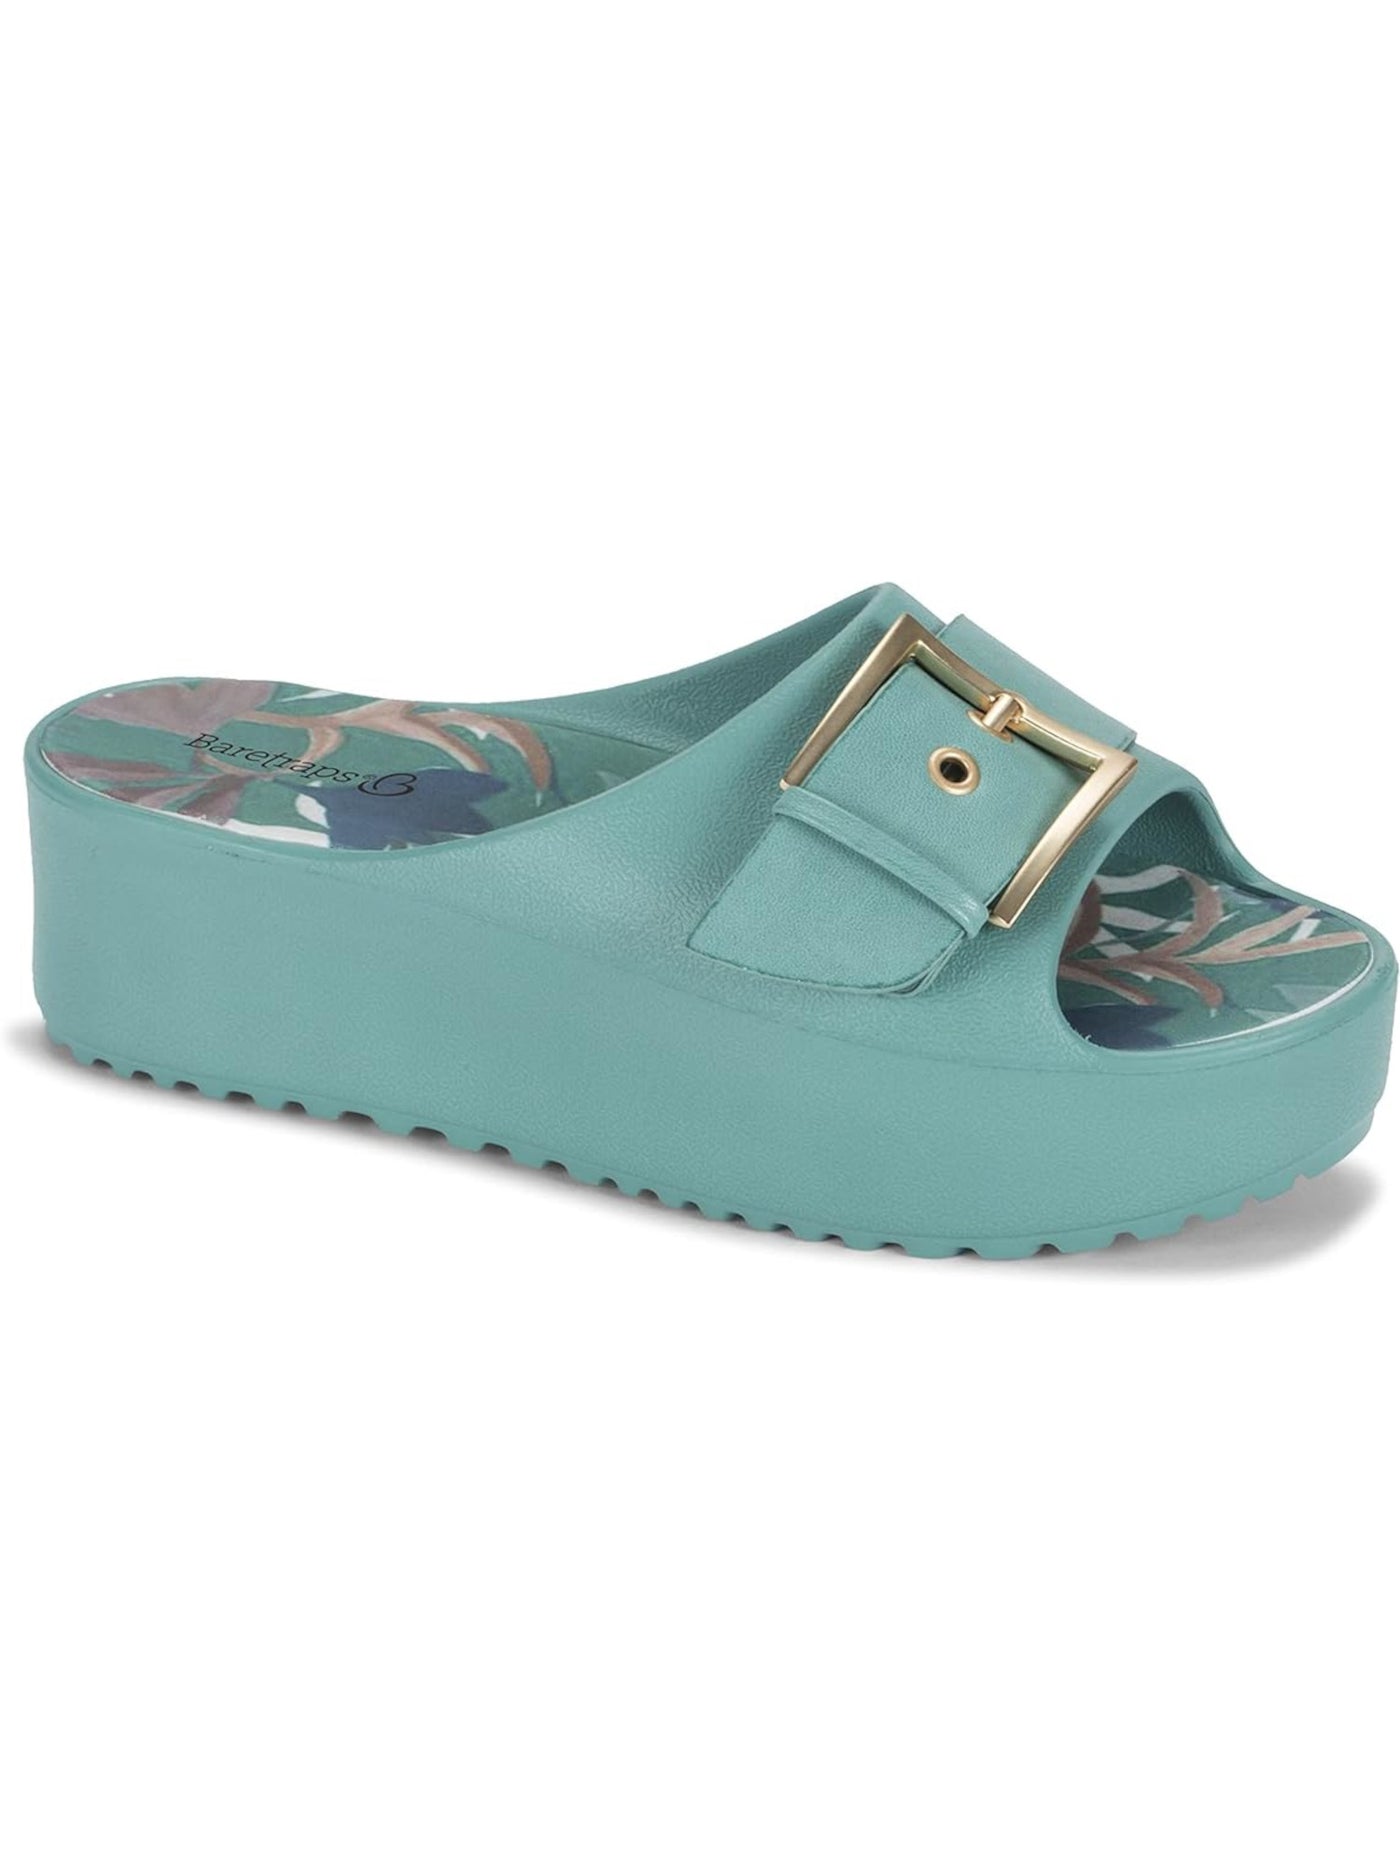 BARETRAPS Womens Teal 1-1/2" Platform Buckle Accent Pacey Open Toe Wedge Slip On Sandals Shoes 10 M